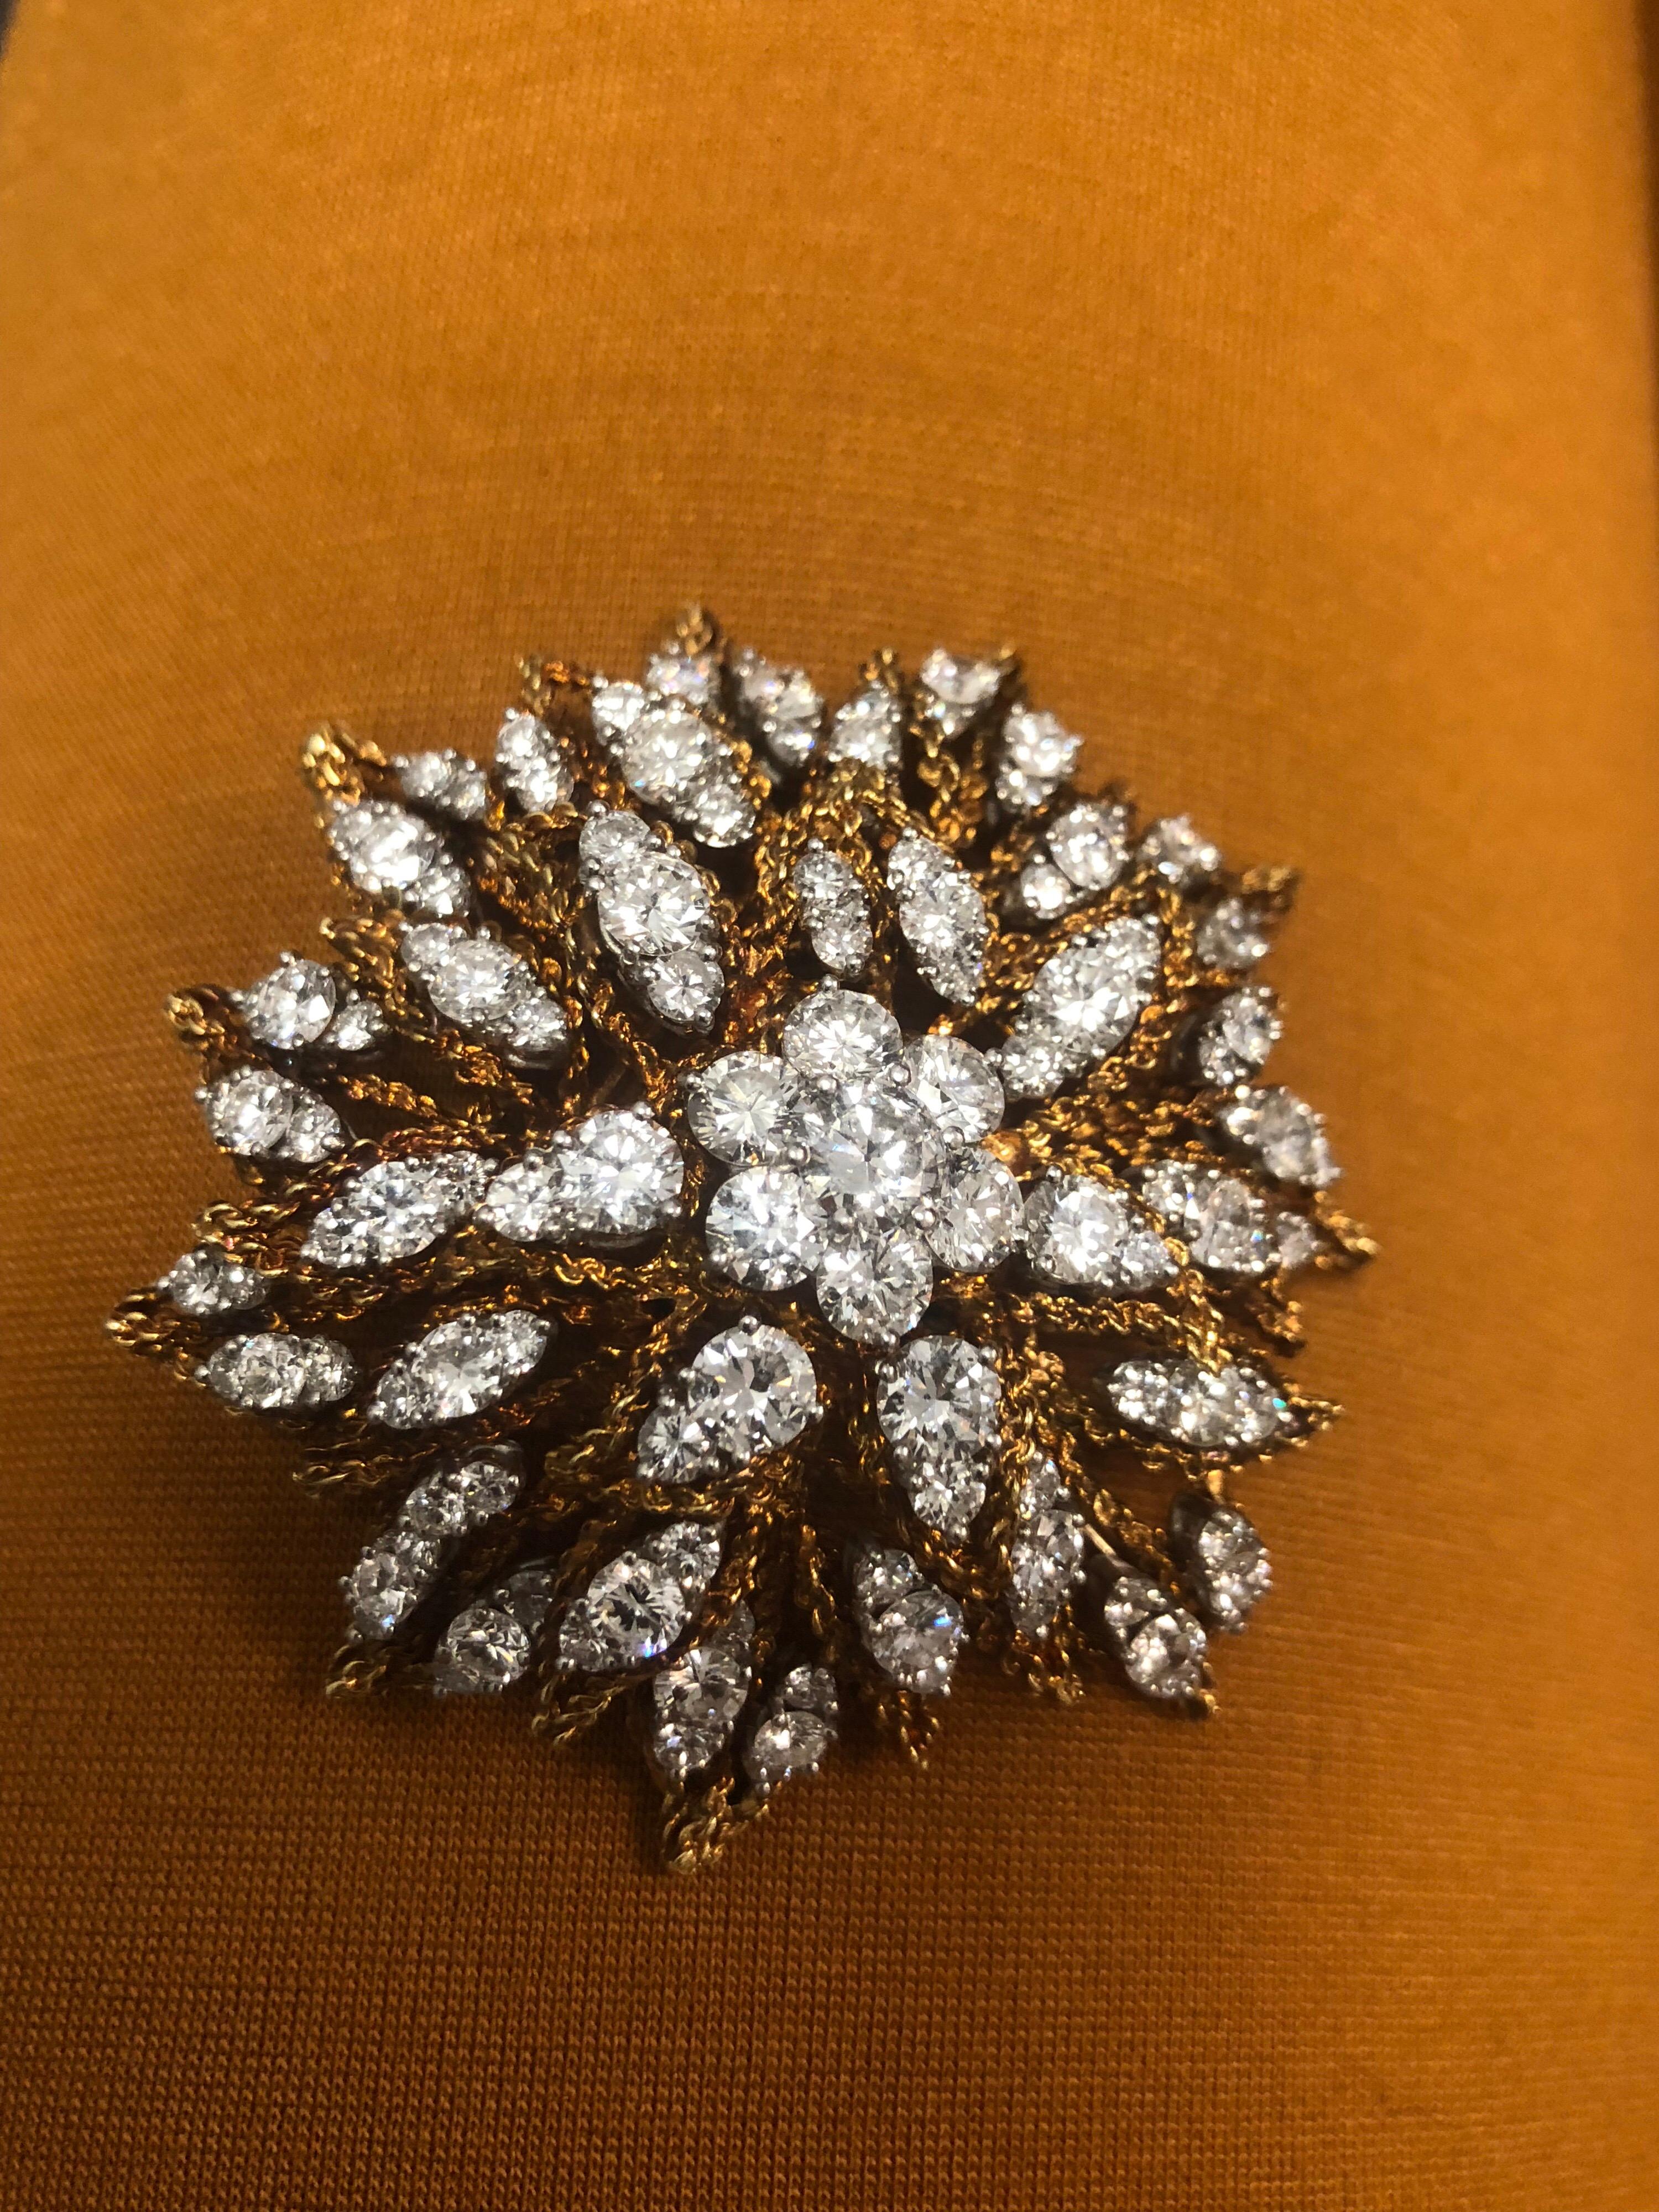 Circa 1960 Platinum and 18k yellow gold sunburst design brooch with diamonds. This immaculate brooch features 122 diamonds weighing 20.70 carats total. 
